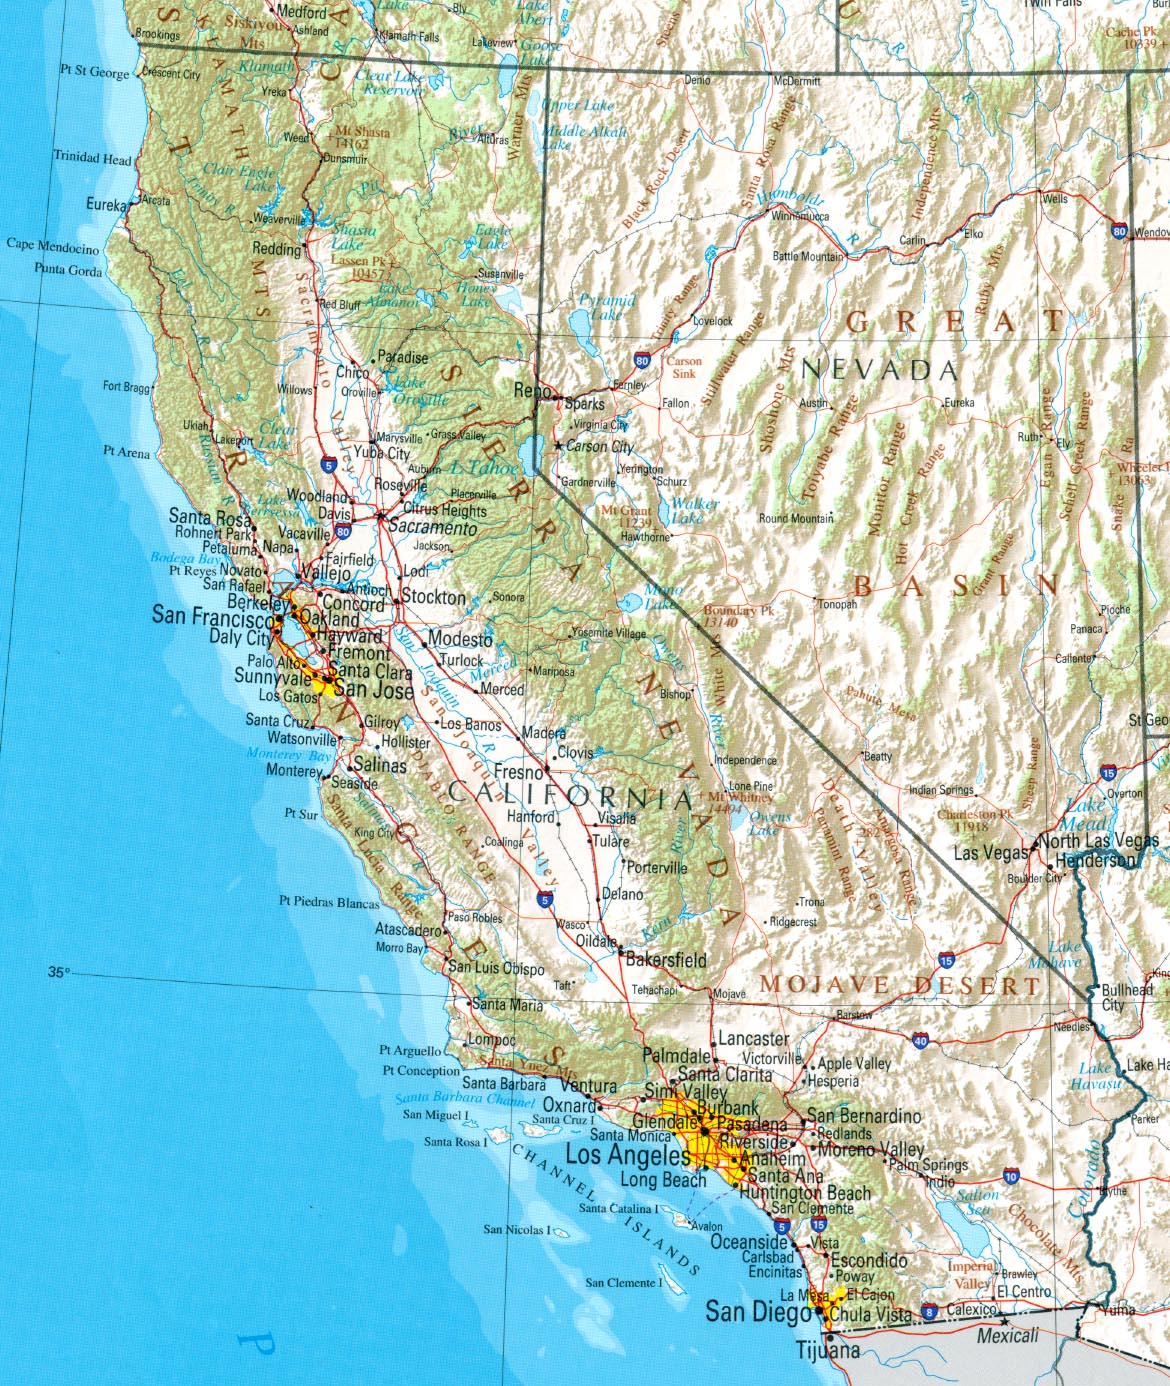 Statemaster - Statistics On California. Facts And Figures, Stats And - Map Of California And Nevada